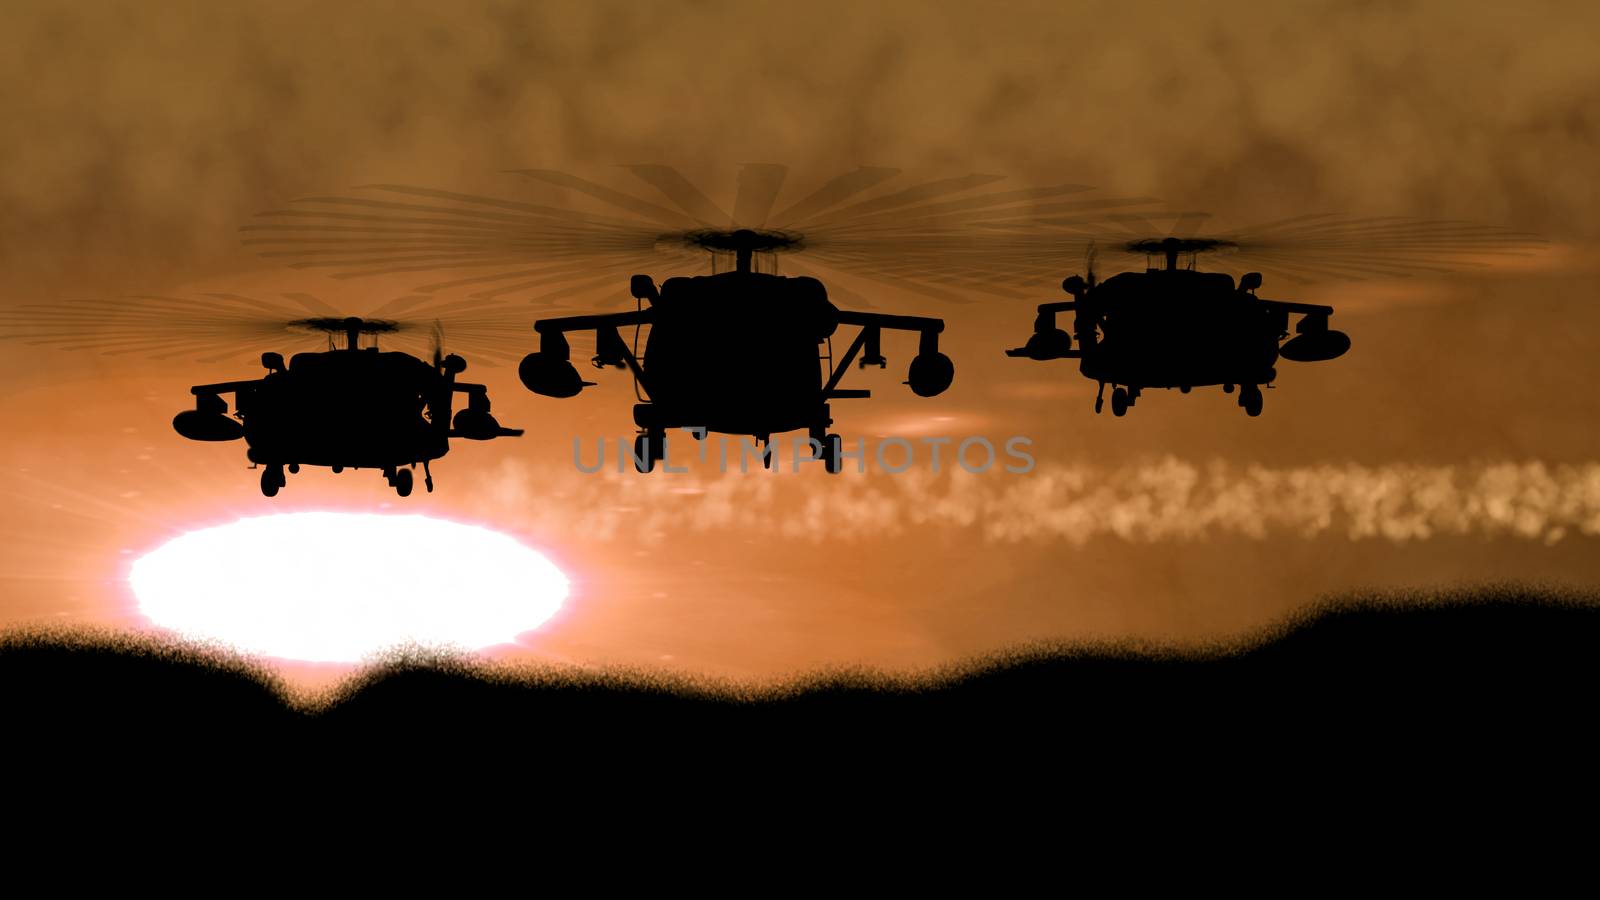 Rampant 3d illustration of Apache helicopter silhouette full of armament soaring at shining brown and orange sunset. It looks fearsome and fine.